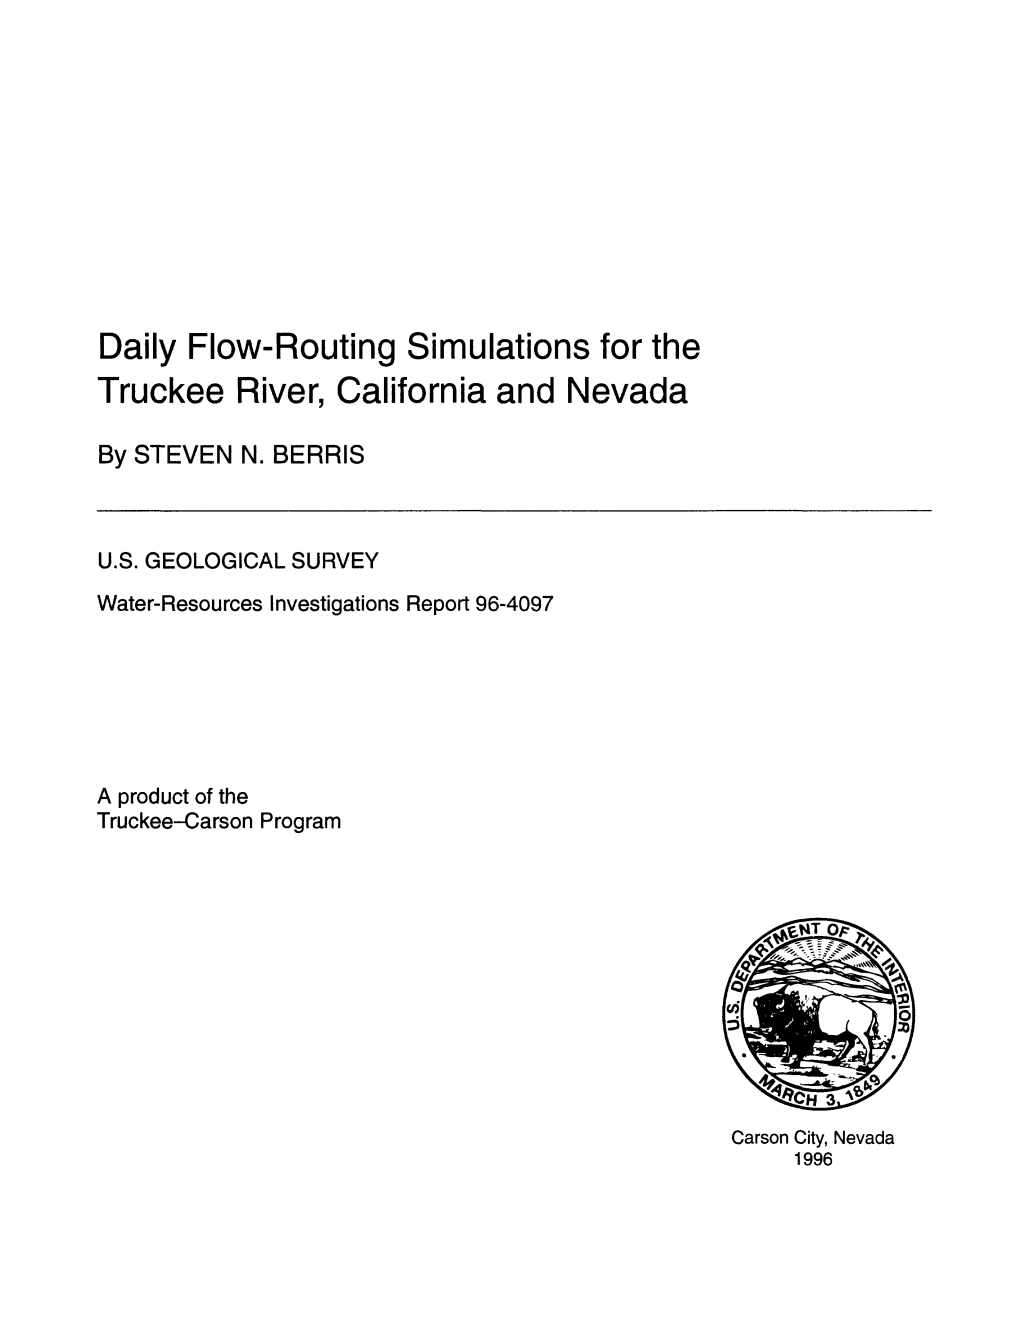 Daily Flow-Routing Simulations for the Truckee River, California and Nevada